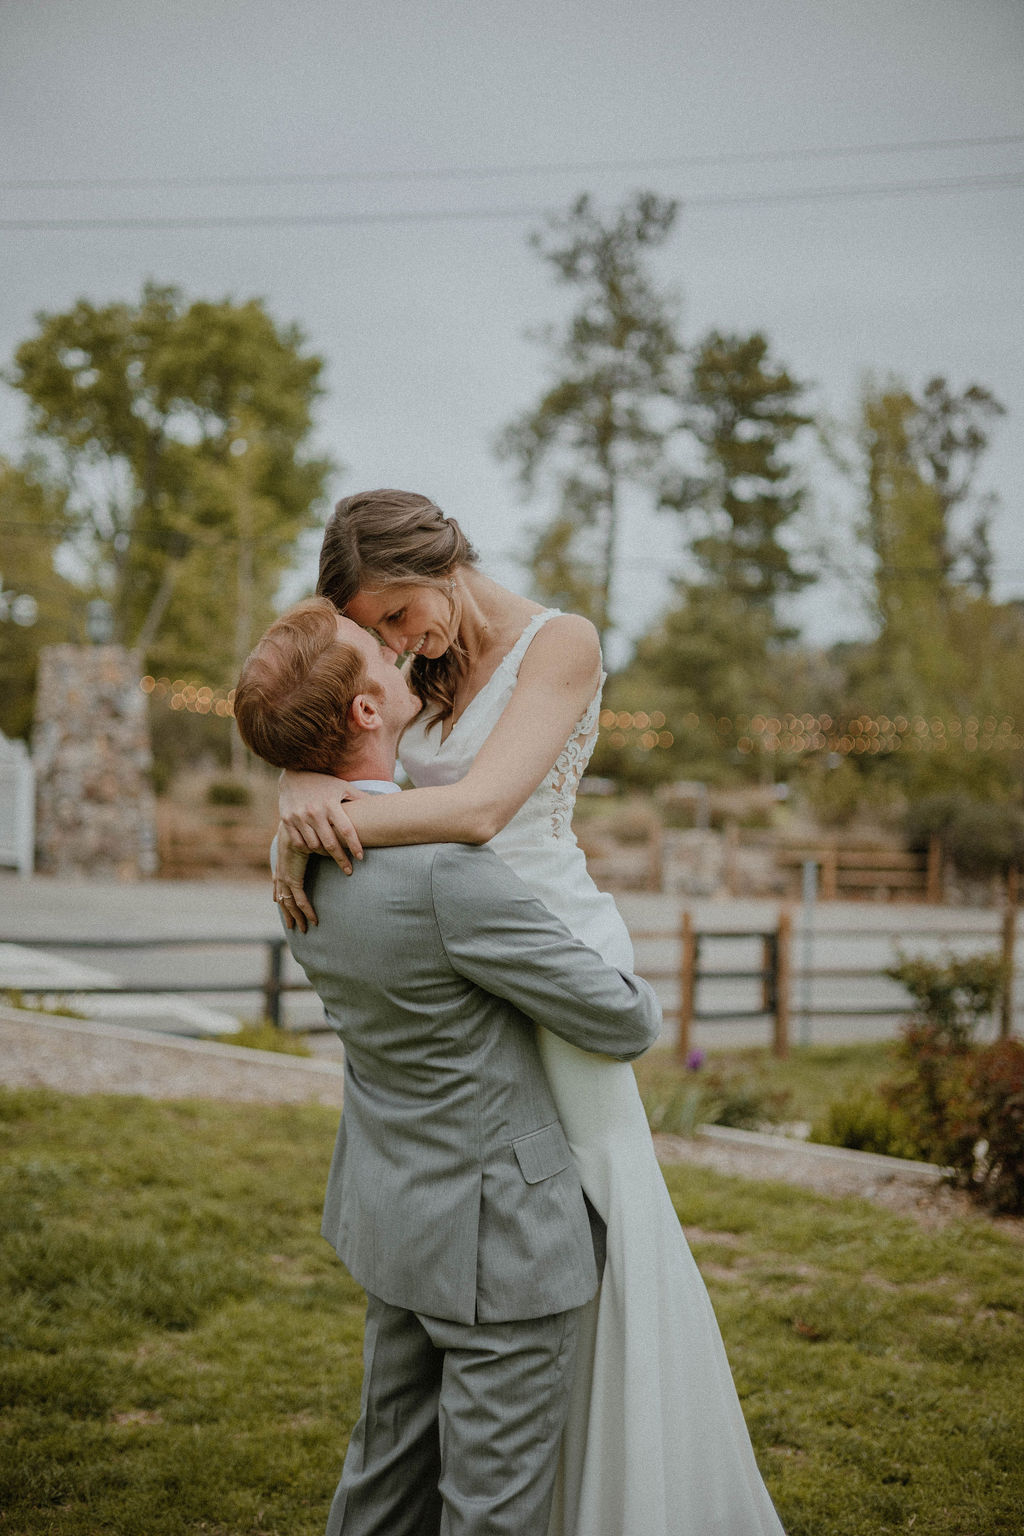 the groom lifts up the bride for a romantic picture at the California wedding venue